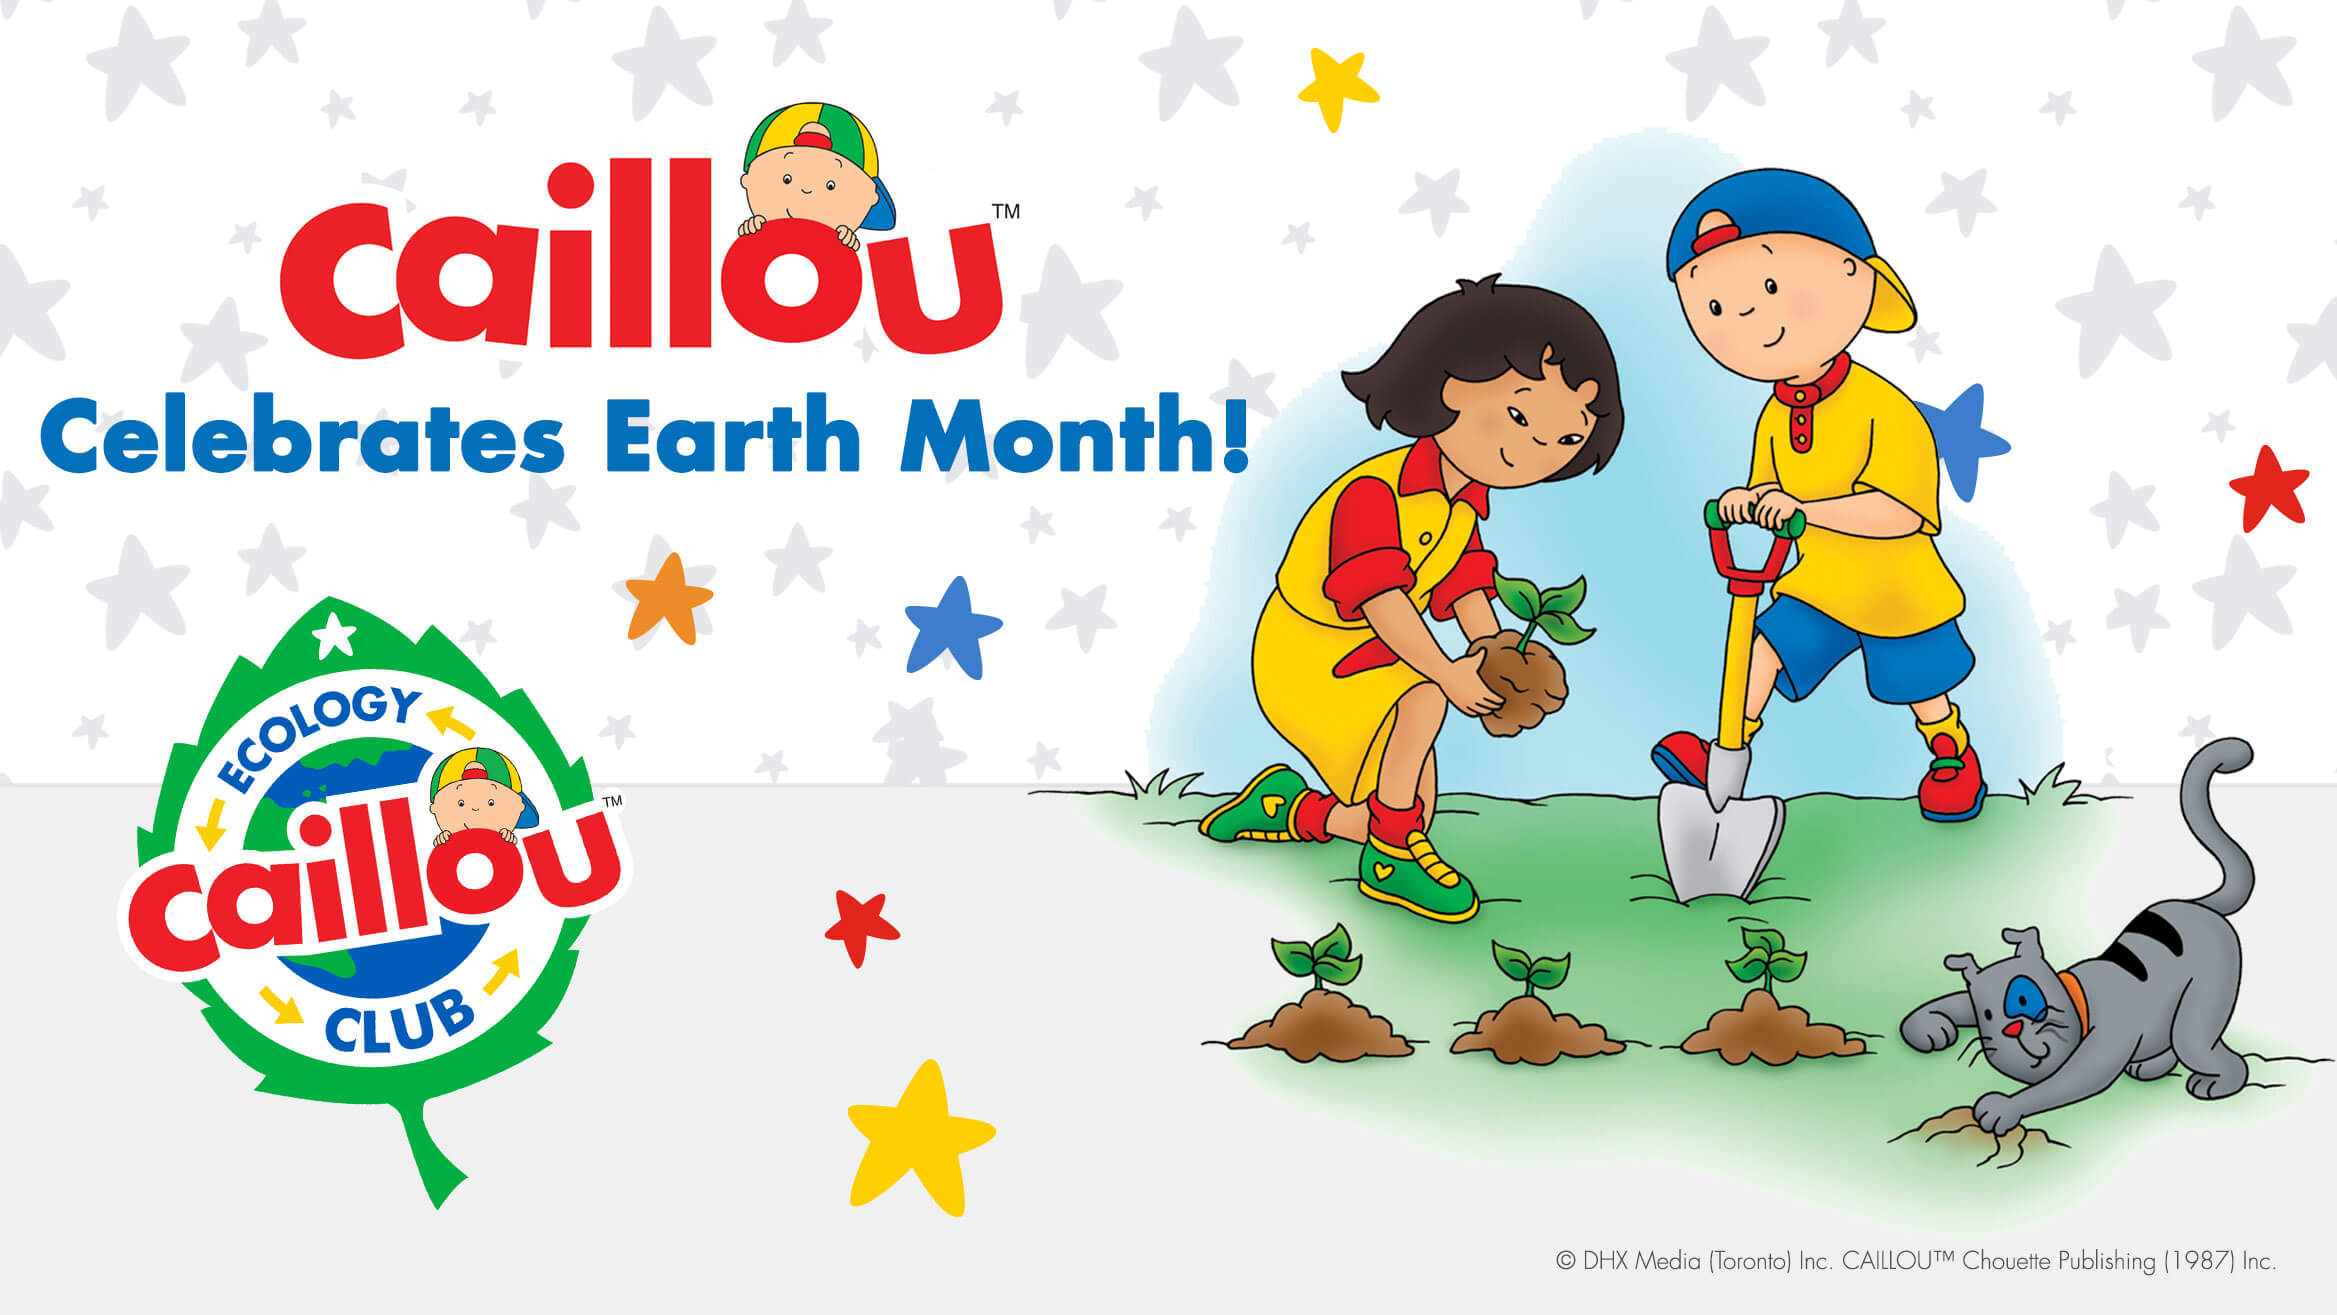 Caillou Celebrates Earth Month! post image